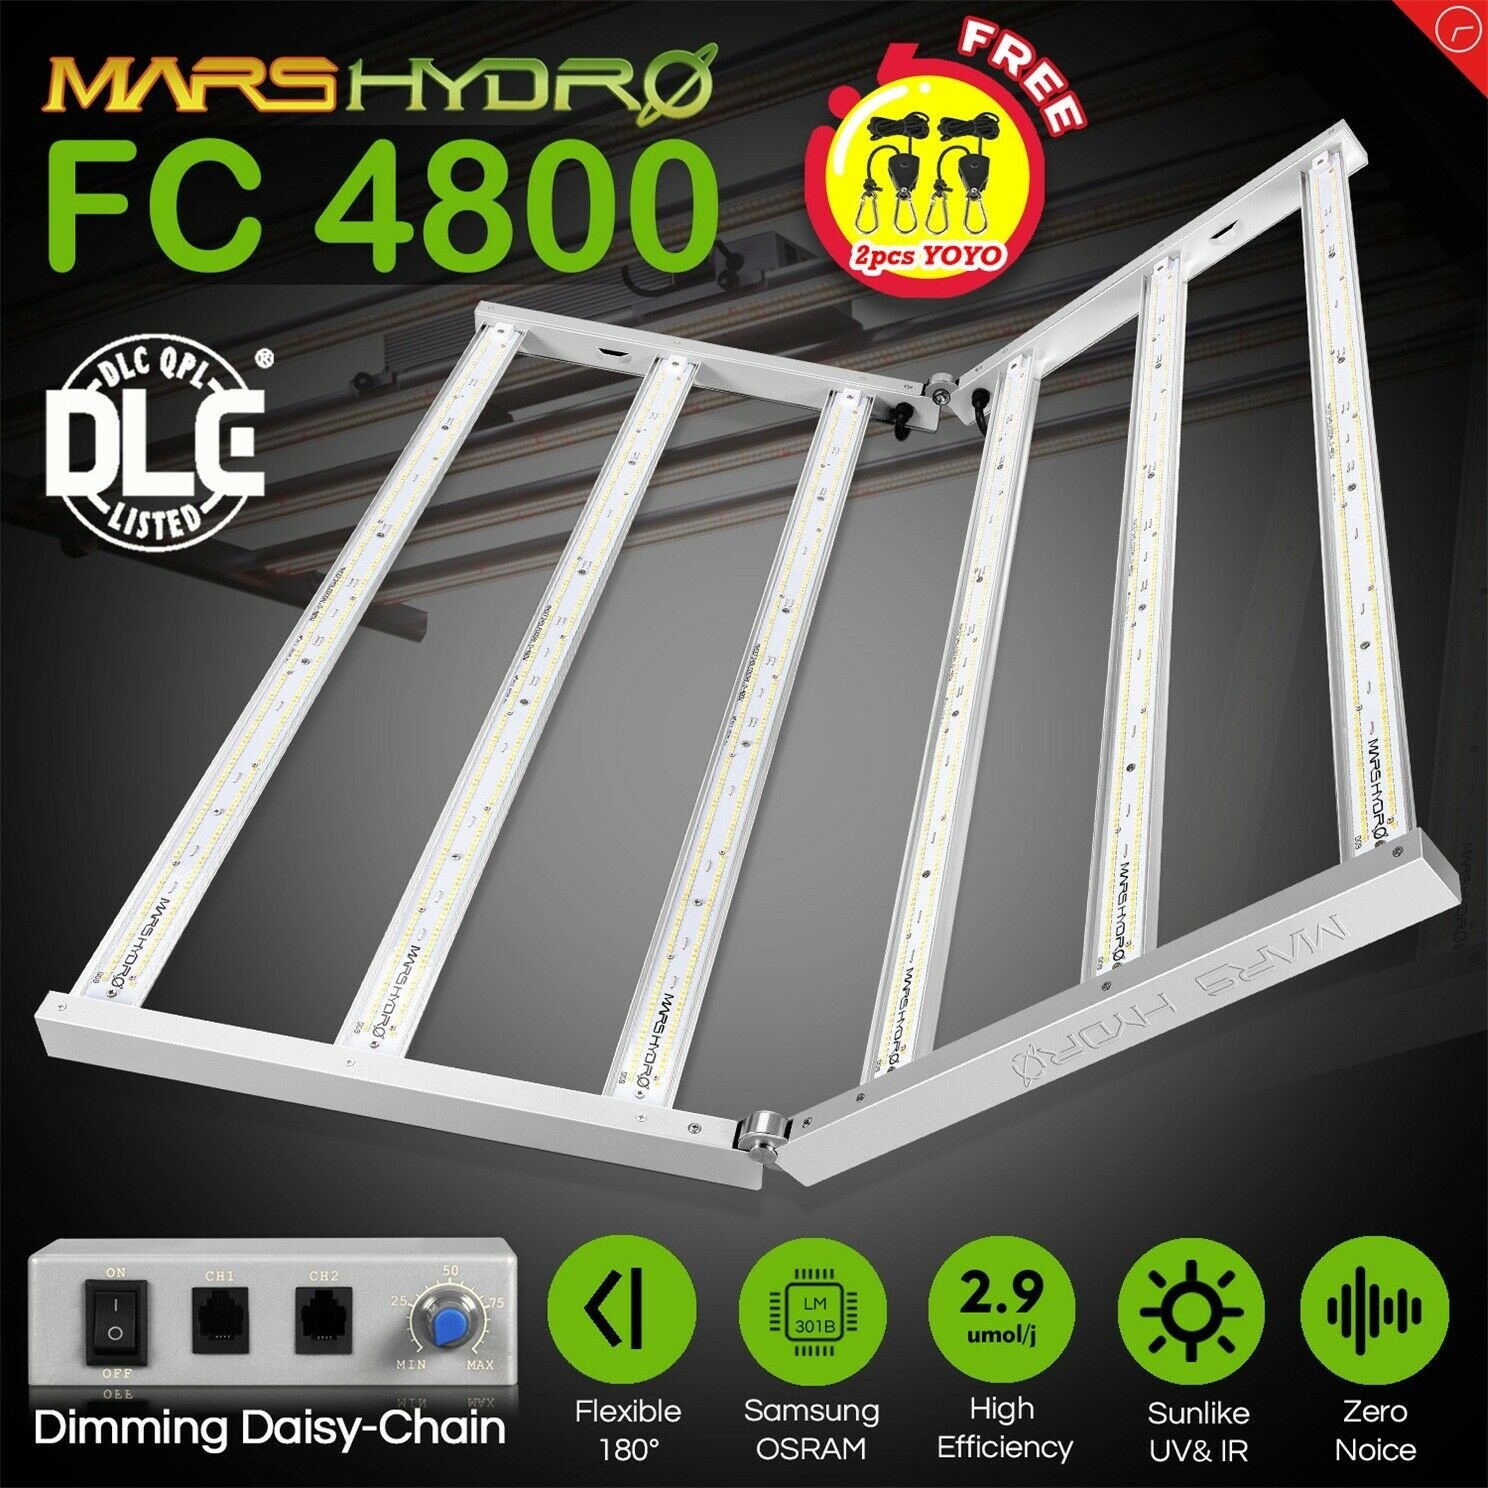 New Designed 2020 Mars Hydro FC 4800 Led Grow Light Full Spectrum Samsung LM301B Osram Diodes Meanwell Driver Hydroponic Commercial Greenhouse Grow 4x4ft, 480W